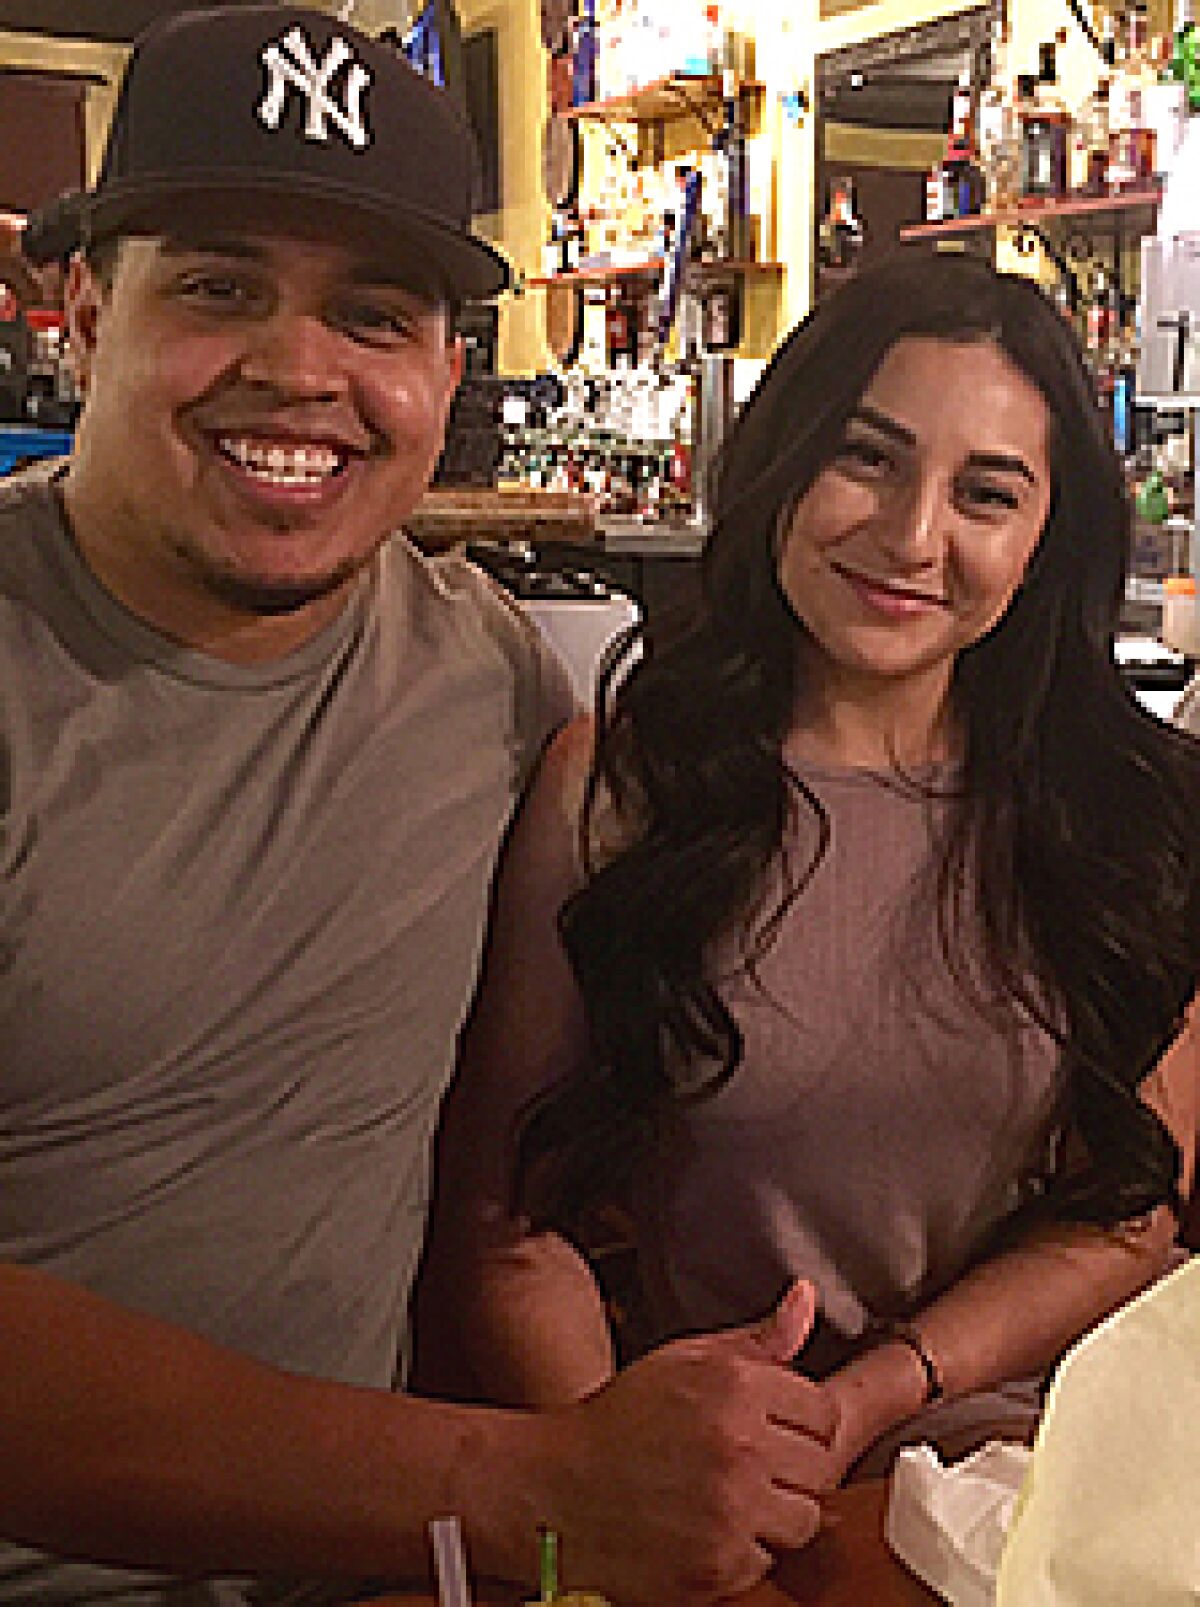 Jonathon Reynoso and Audrey Moran in an undated photo. The couple went missing in 2017.